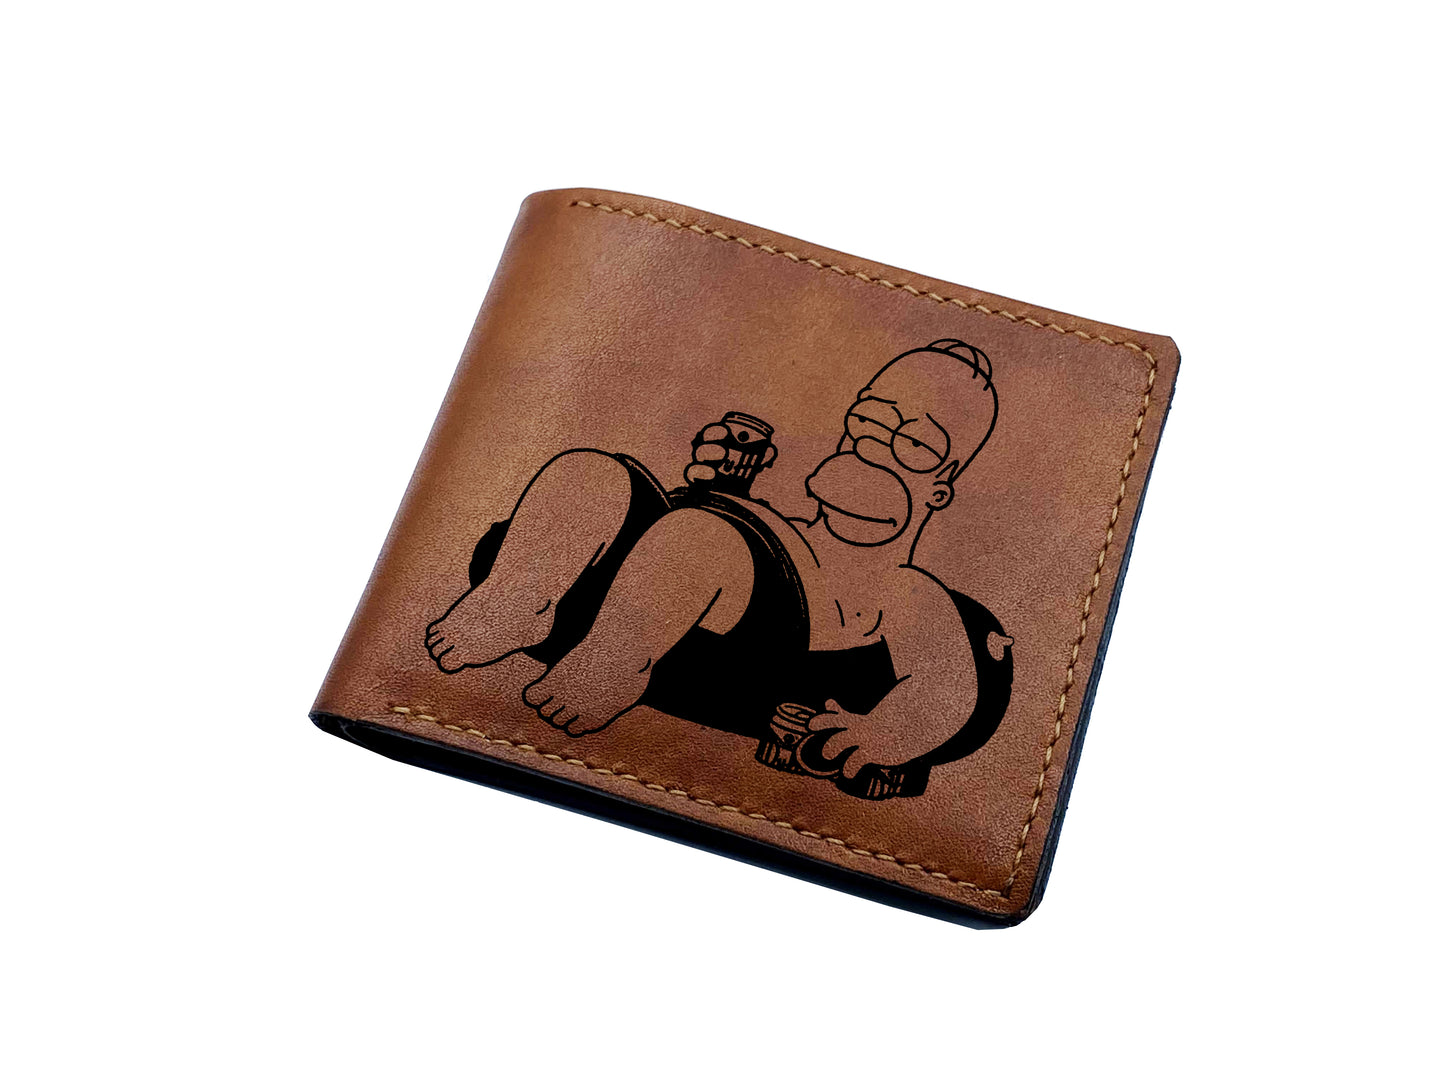 Mayan Corner - Personalized leather handmade wallet, The Simpsons movie engraving wallet, Homer and Bart Simpson, leather art wallet for him, gift for dad, husband